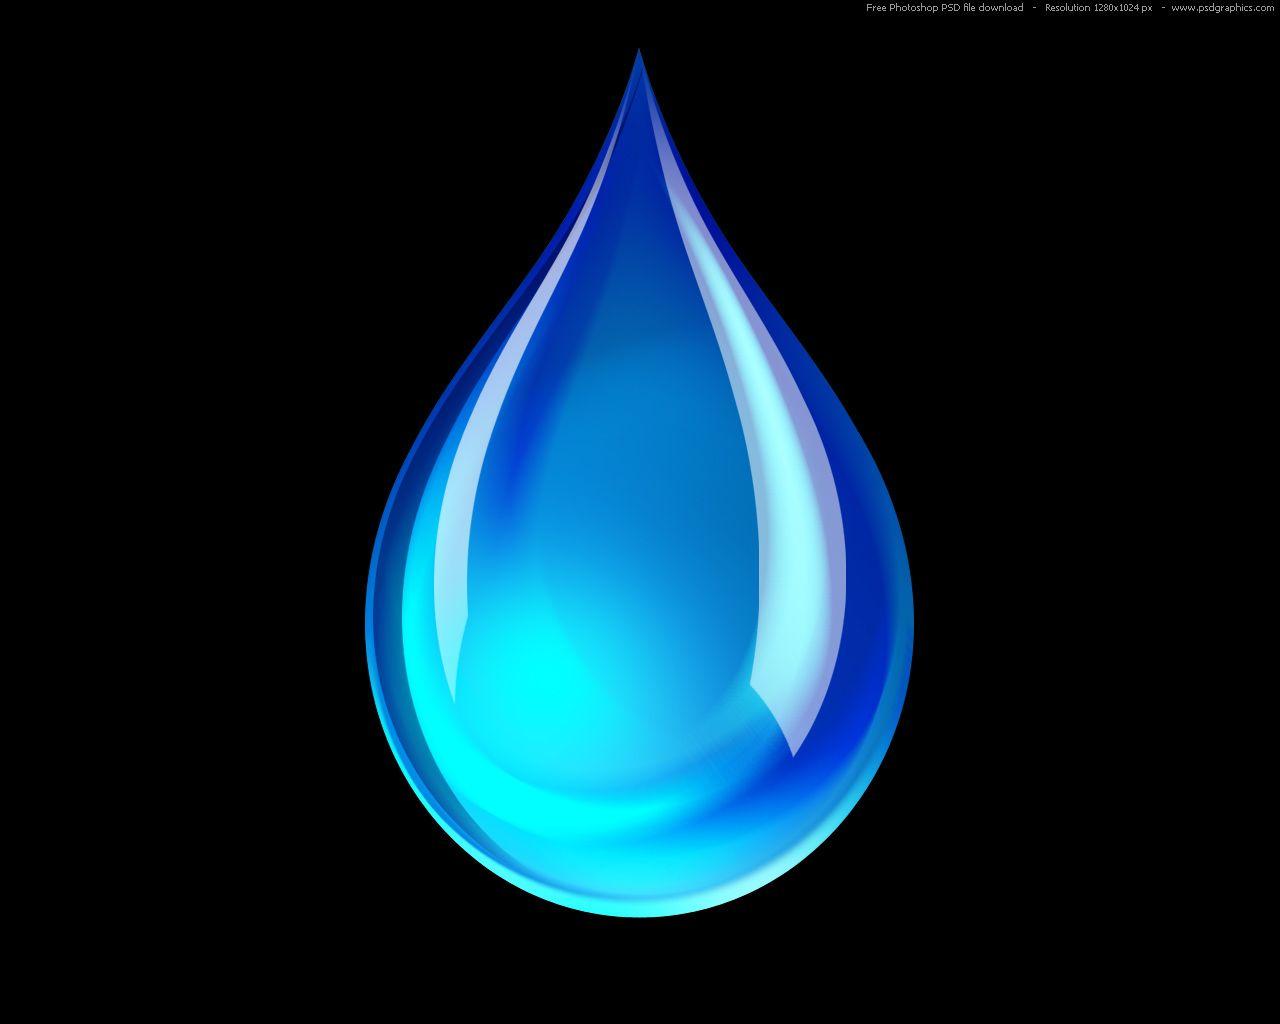 Blue Water Drop Logo - PSD blue water droplet icon